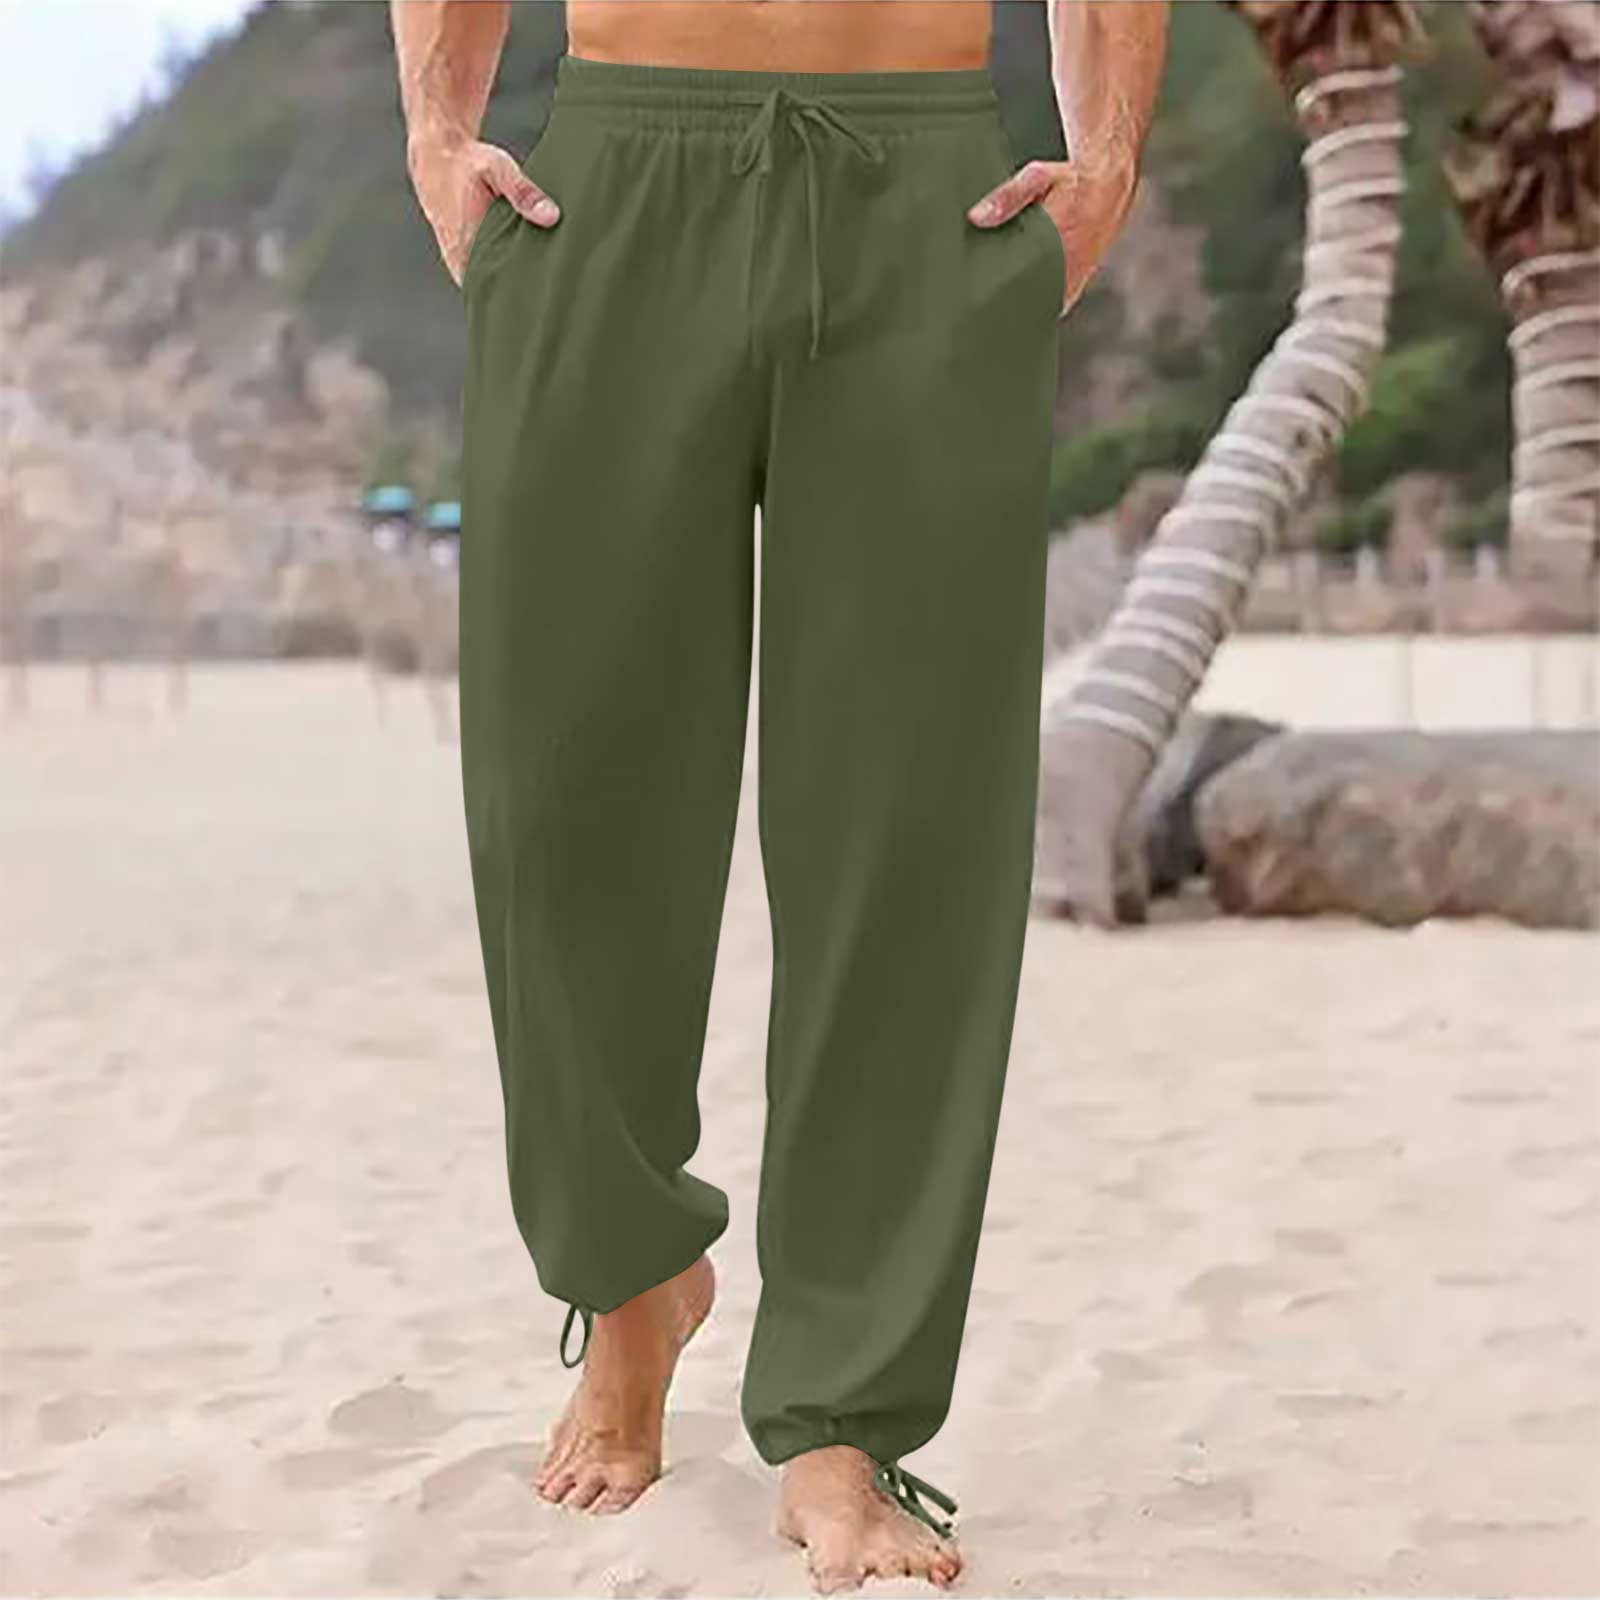  PASLTER Men's Cotton Linen Pants Casual Elastic Waist  Drawstring Trouser Lightweight Loose Straight-Legs Beach Yoga Pants Army  Green : Clothing, Shoes & Jewelry